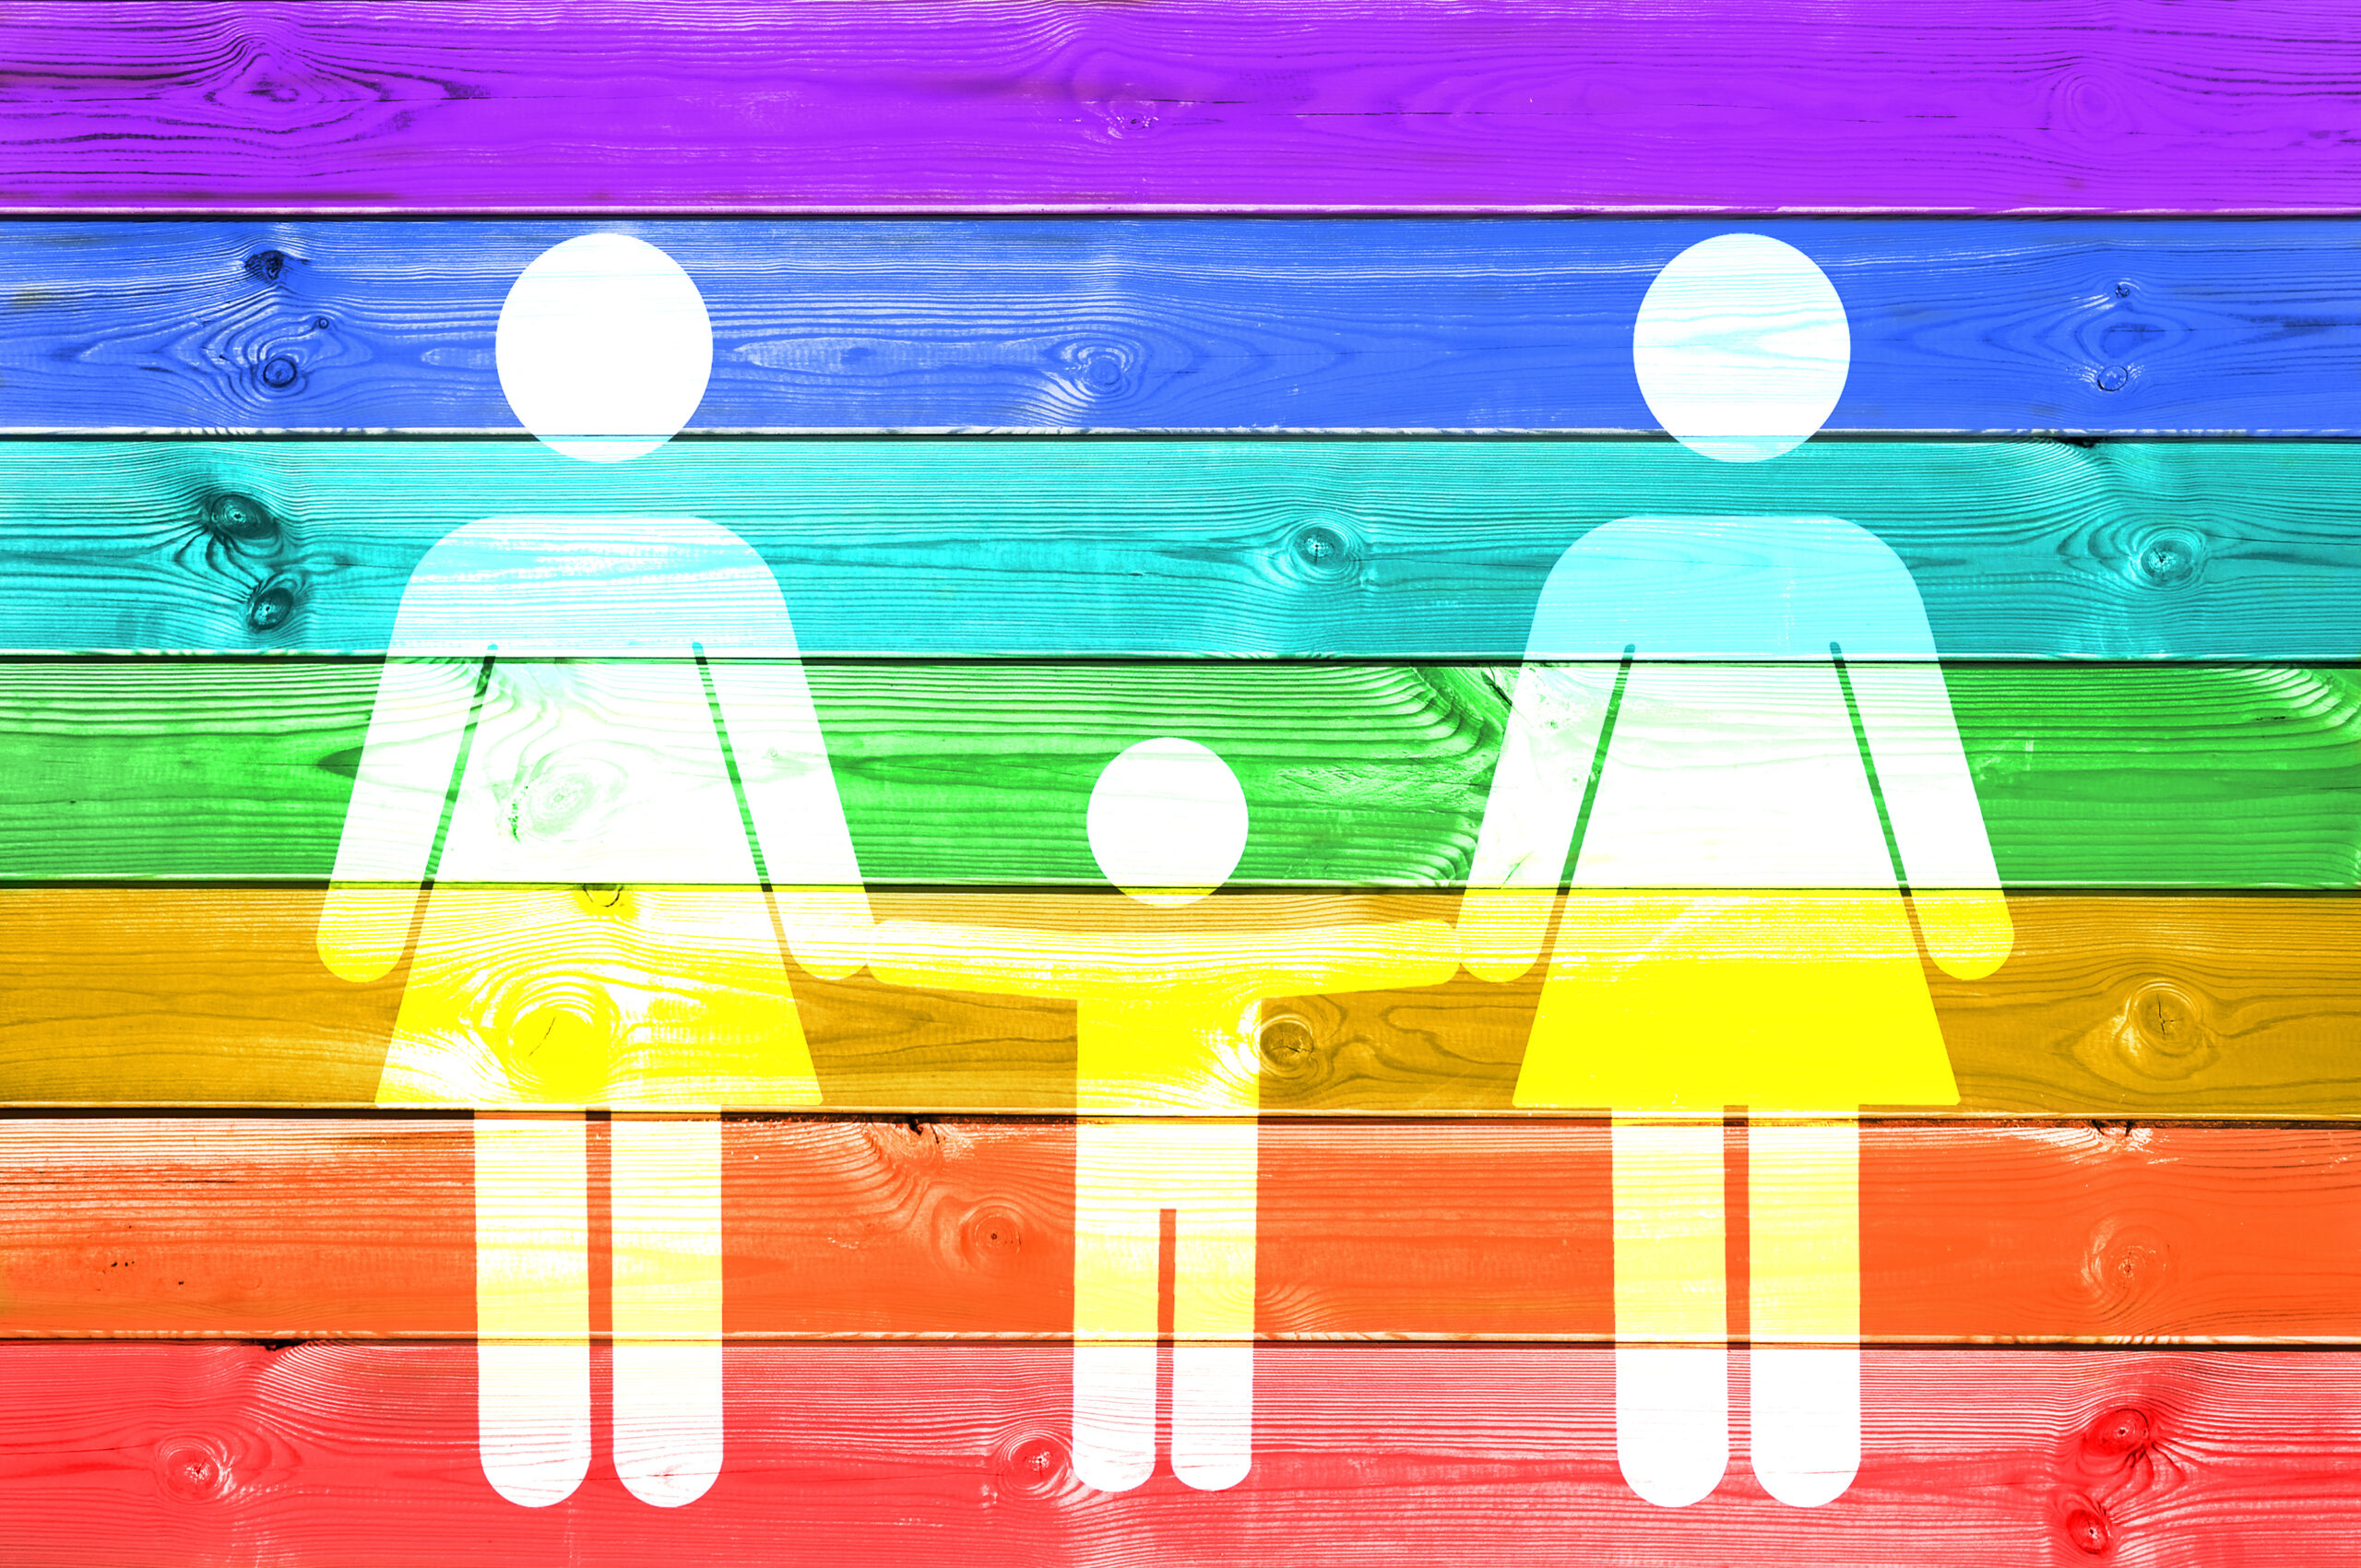 Lesbian family with child white sign on a rainbow gay flag wood planks background